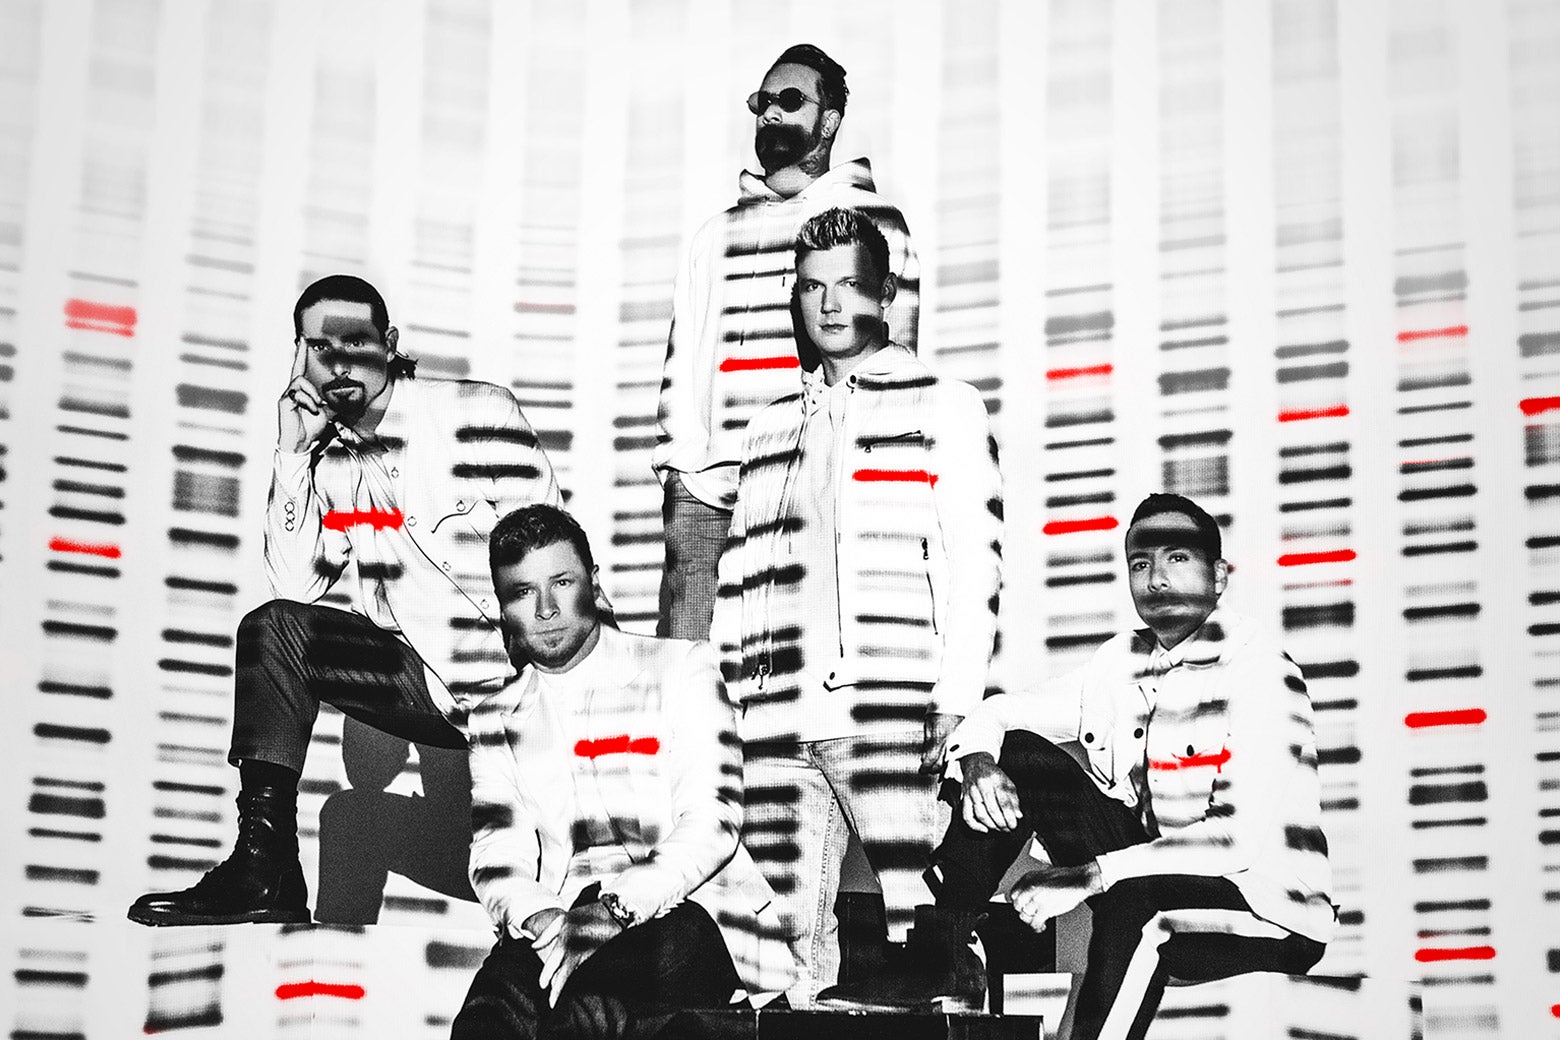 The Backstreet Boys posed, lit with red and black bands of color resembling a DNA sequencing image.